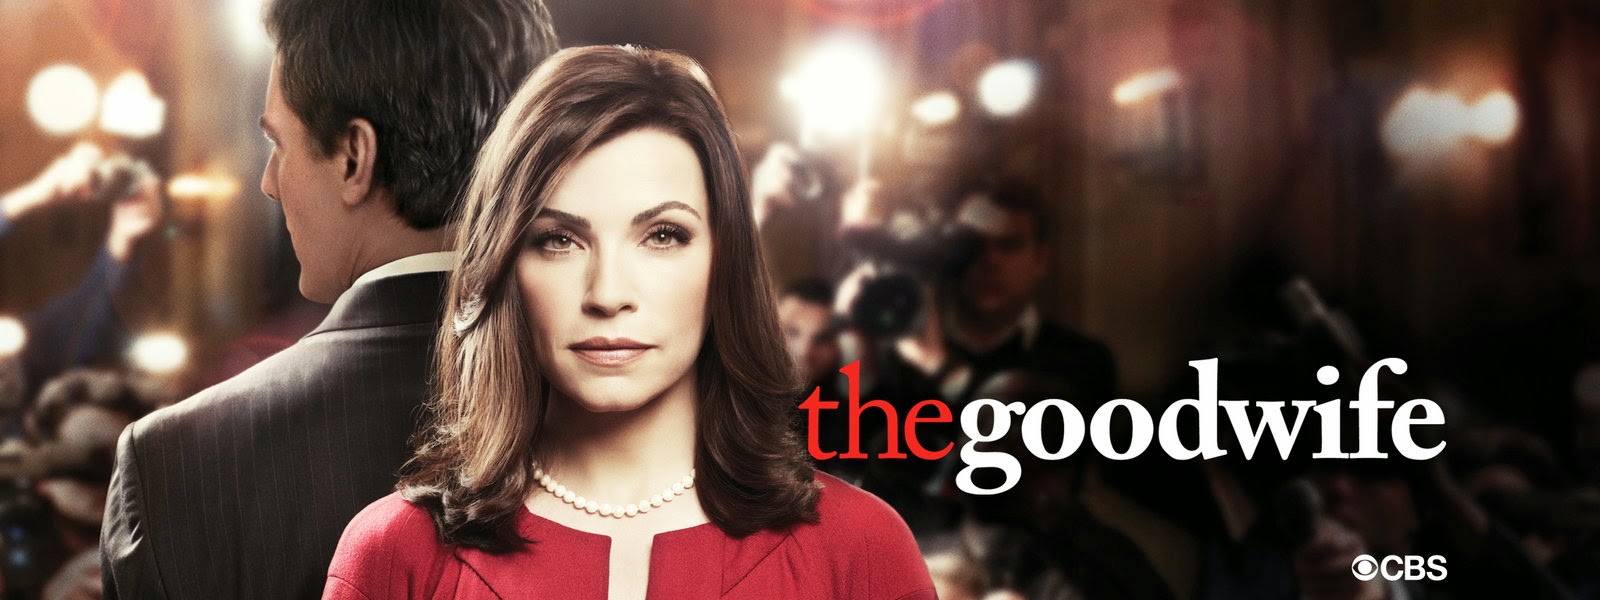 POLL : What was your Favourite Episode of The Good Wife this Season?